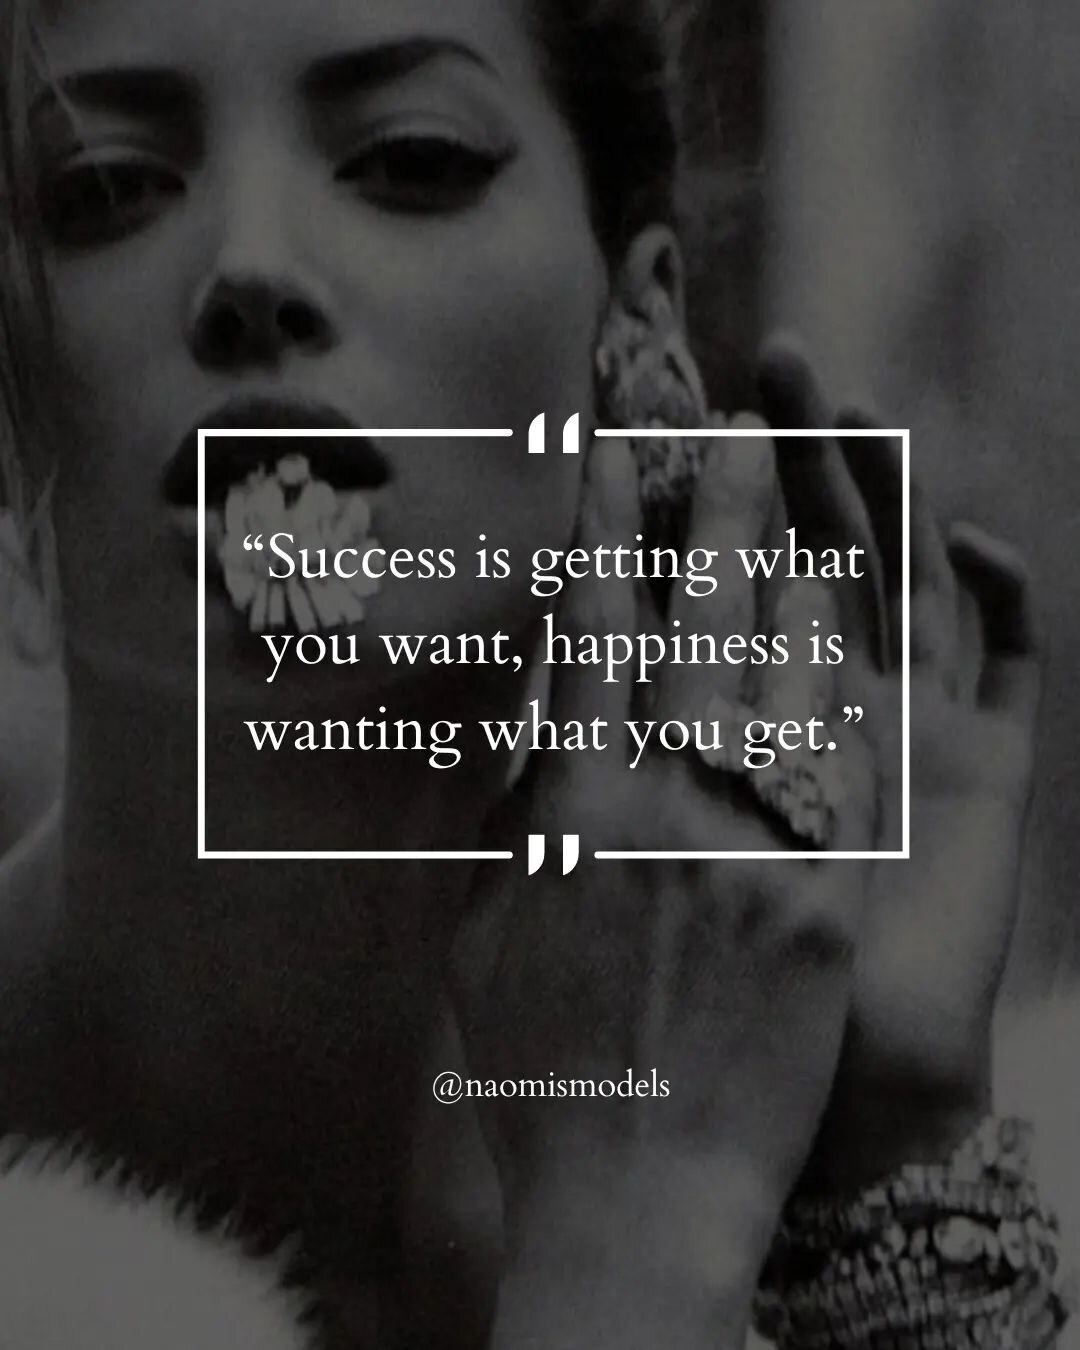 &ldquo;Success is getting what you want. Happiness is wanting what you get.&rdquo; 🌠

#naomismodels #quoteoftheday #inspiration #motivation #models #nycmodels #castingagency #modelscout